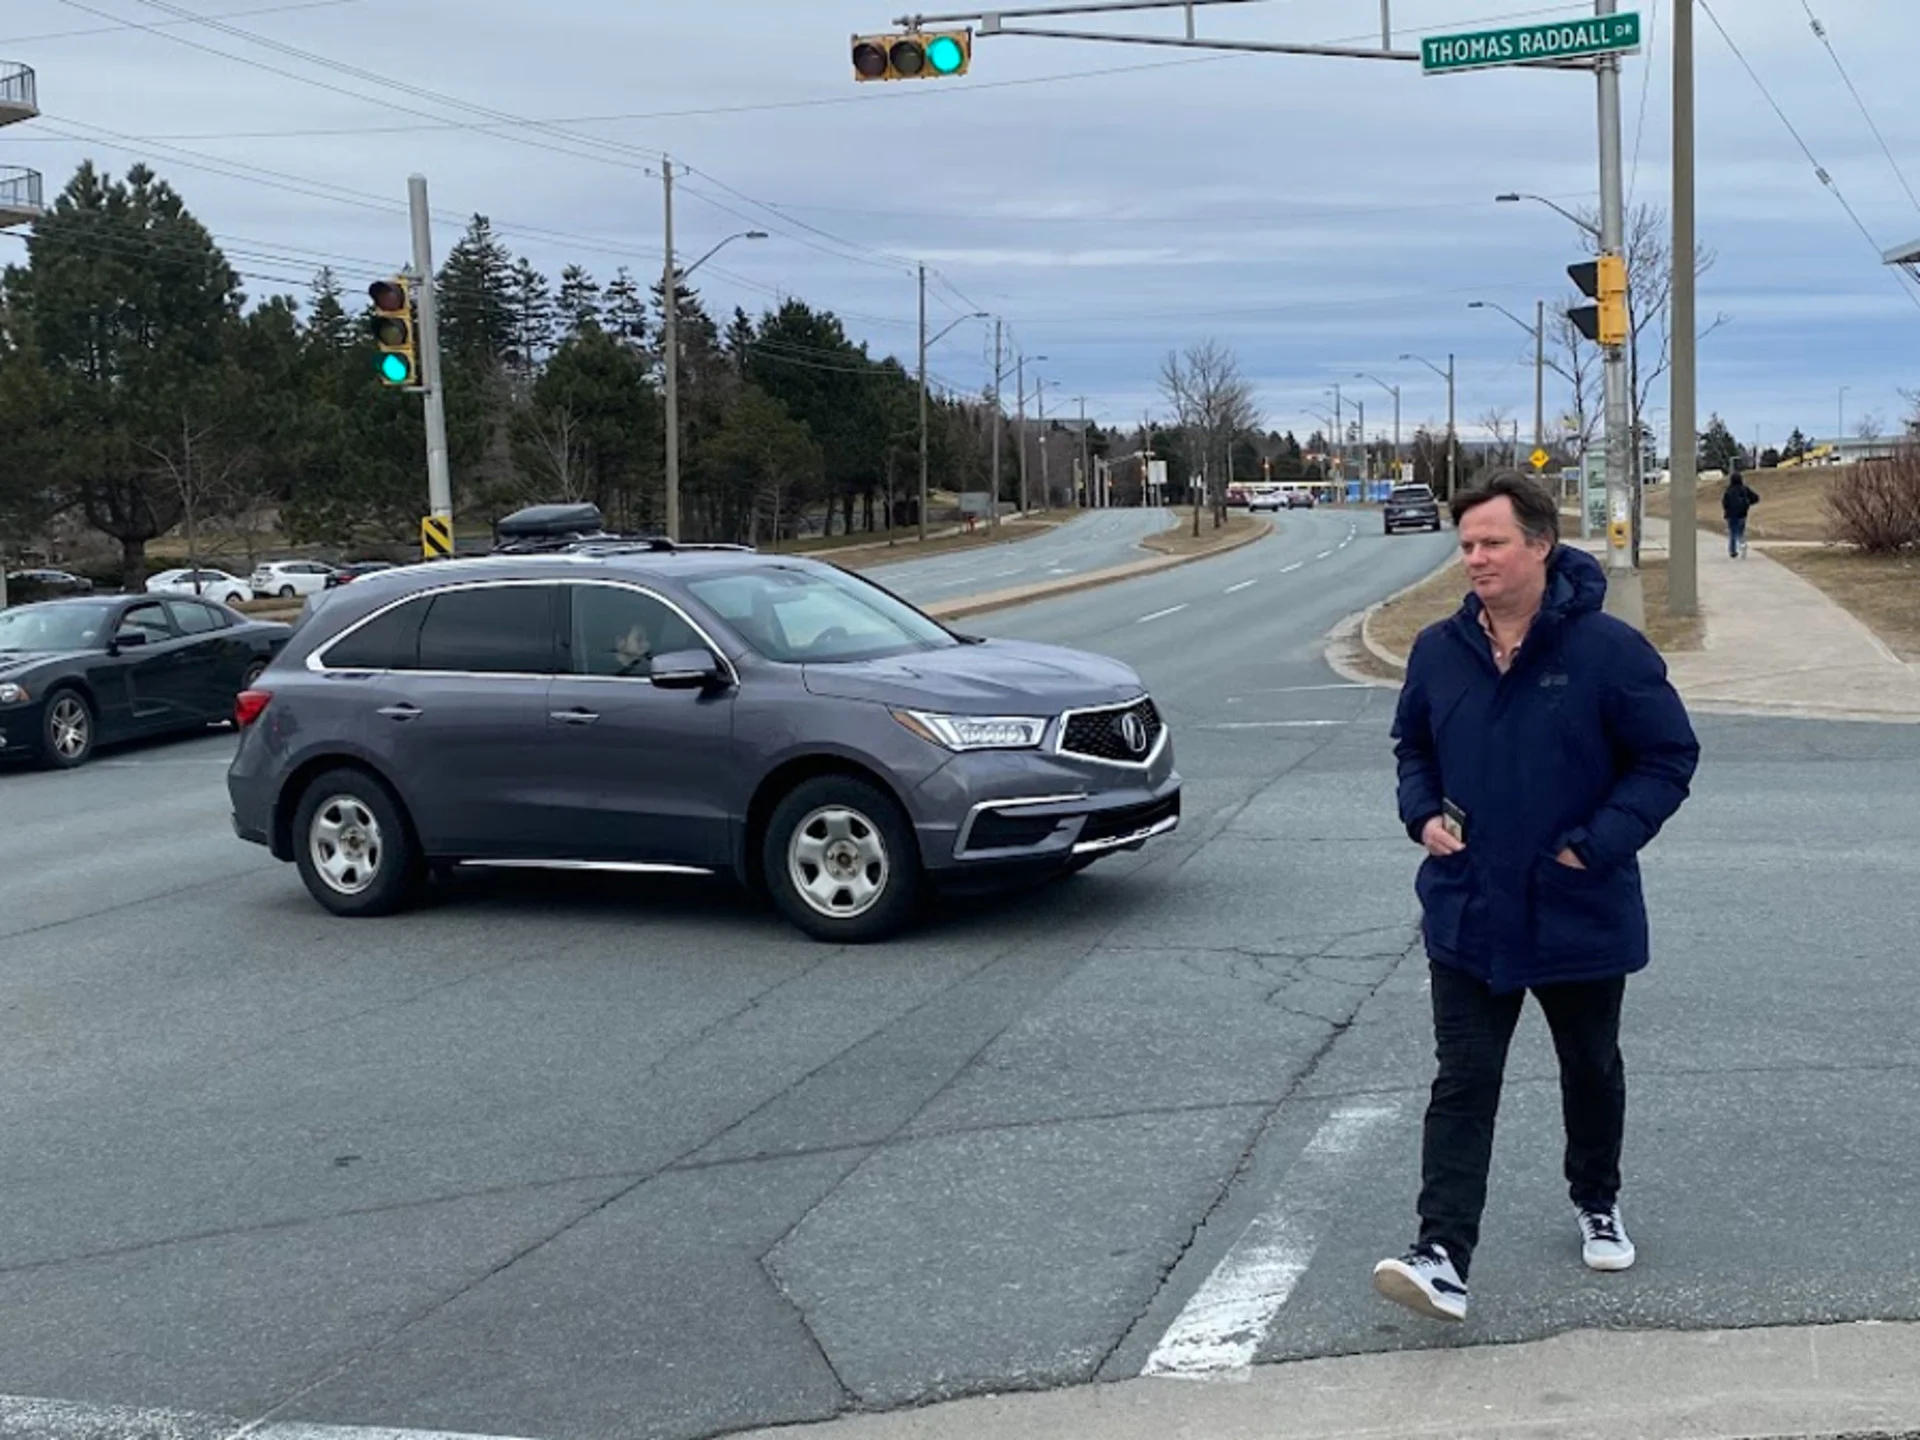 Halifax residents call for safer crosswalks, bike lanes to prevent accidents